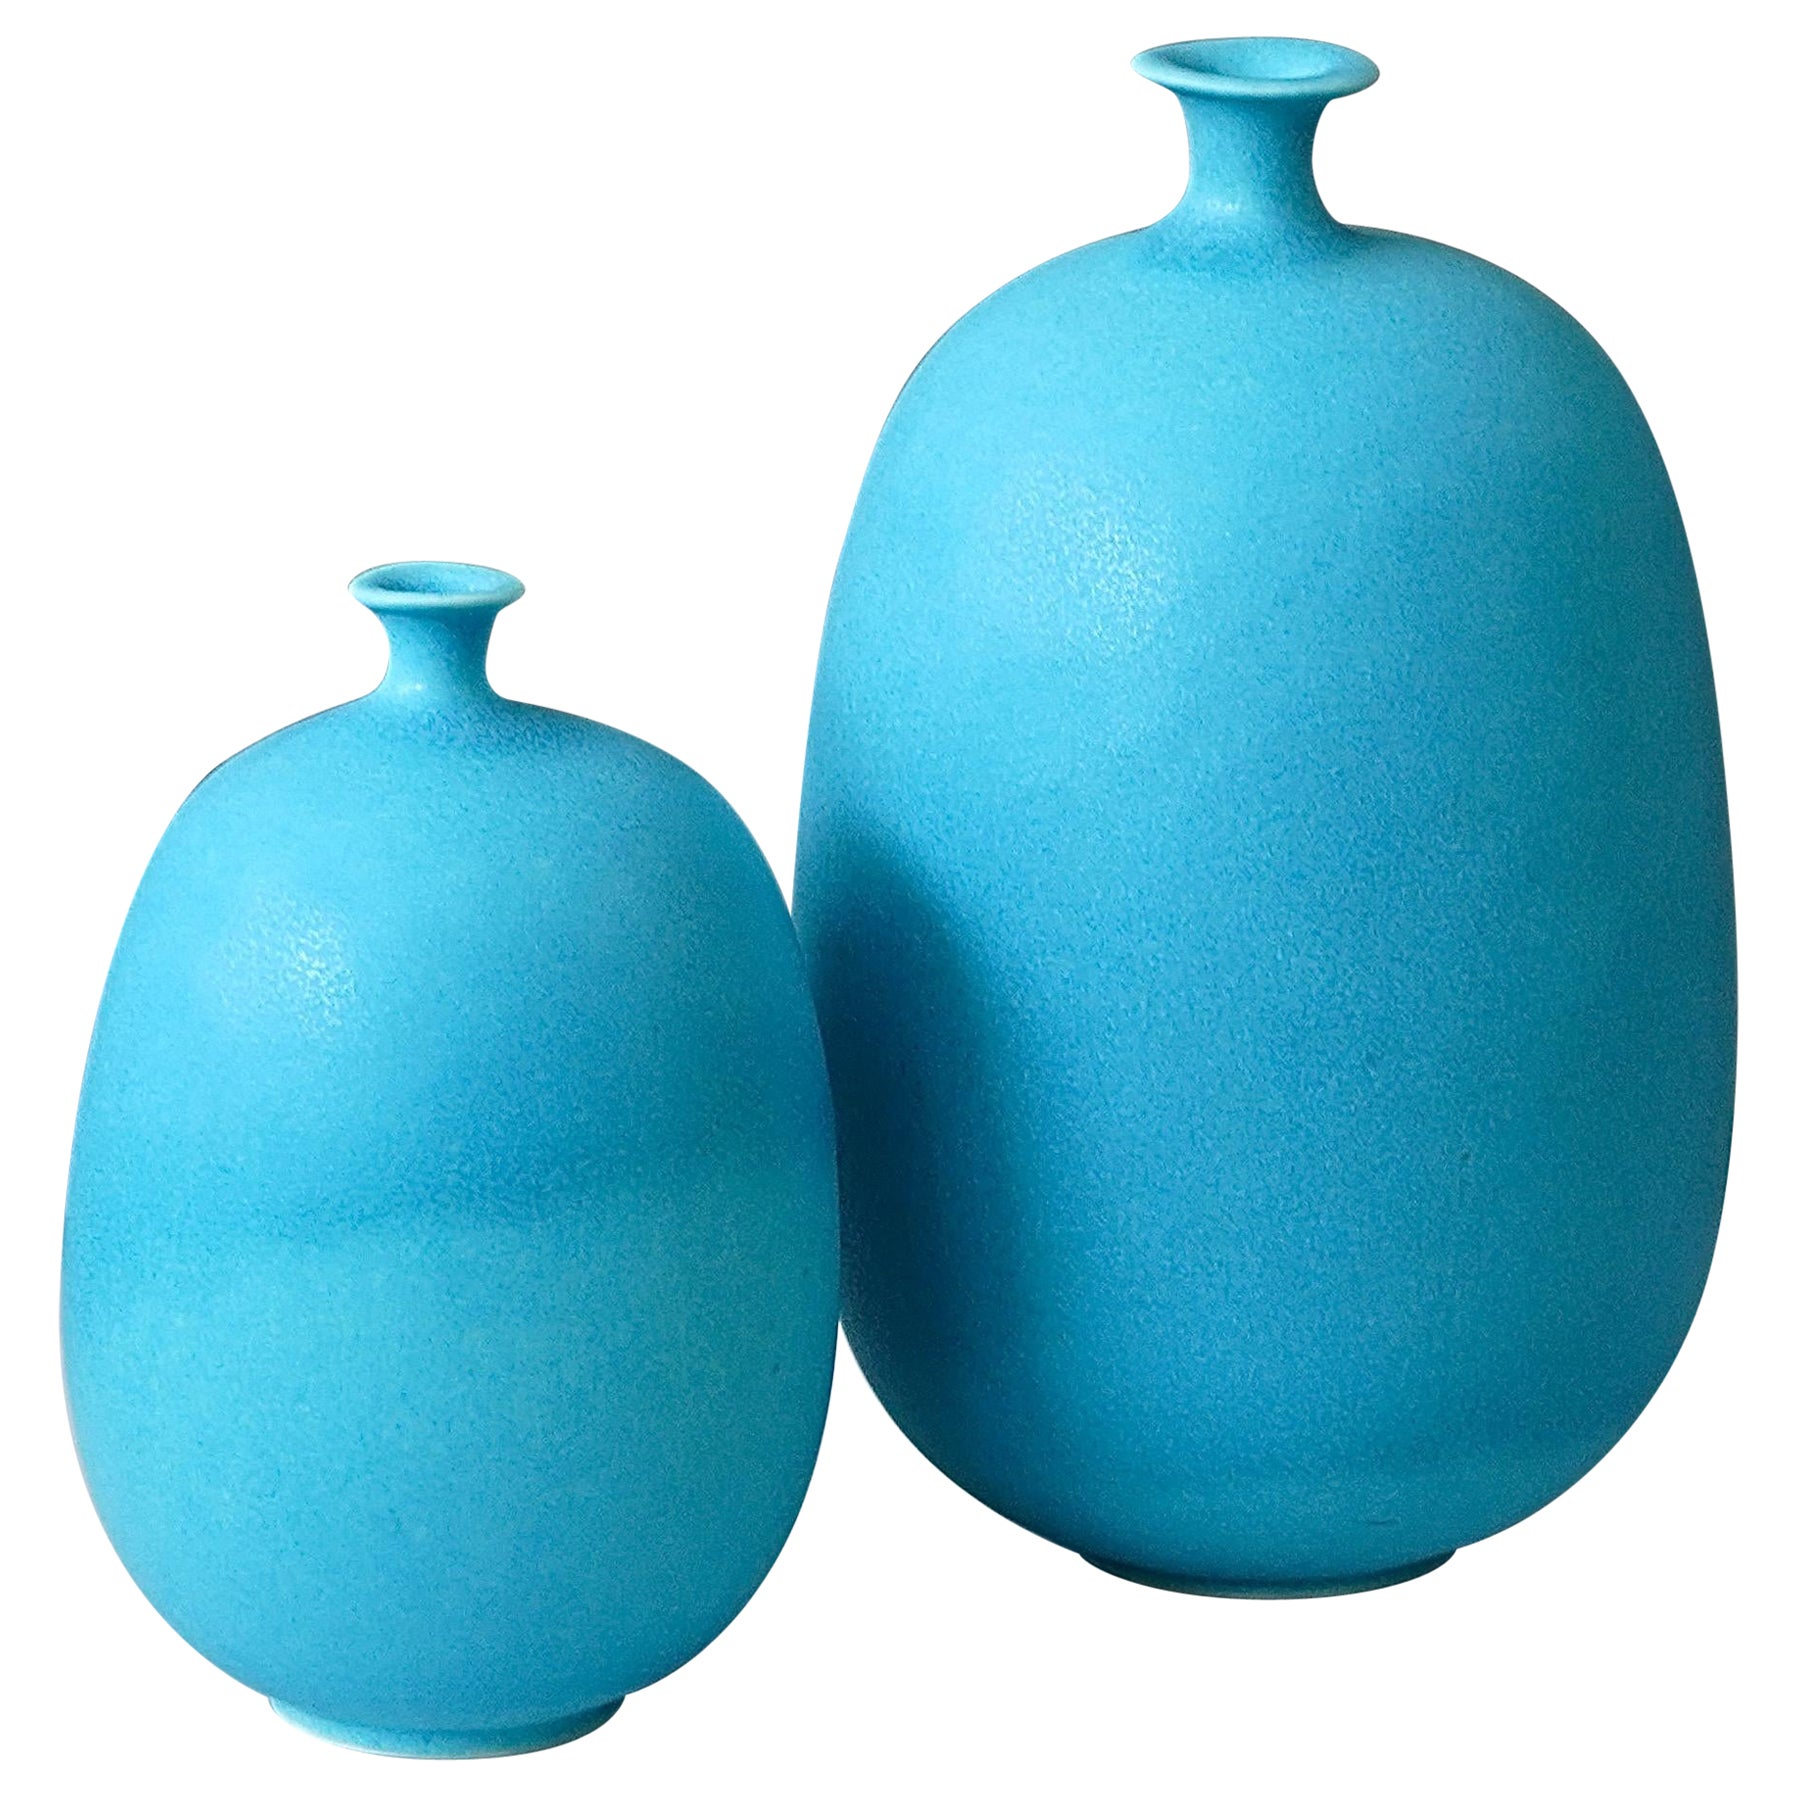 Set of 2 stoneware 'Balloon' Vases by Inger Persson, Rorstrand, Sweden, 1980s For Sale